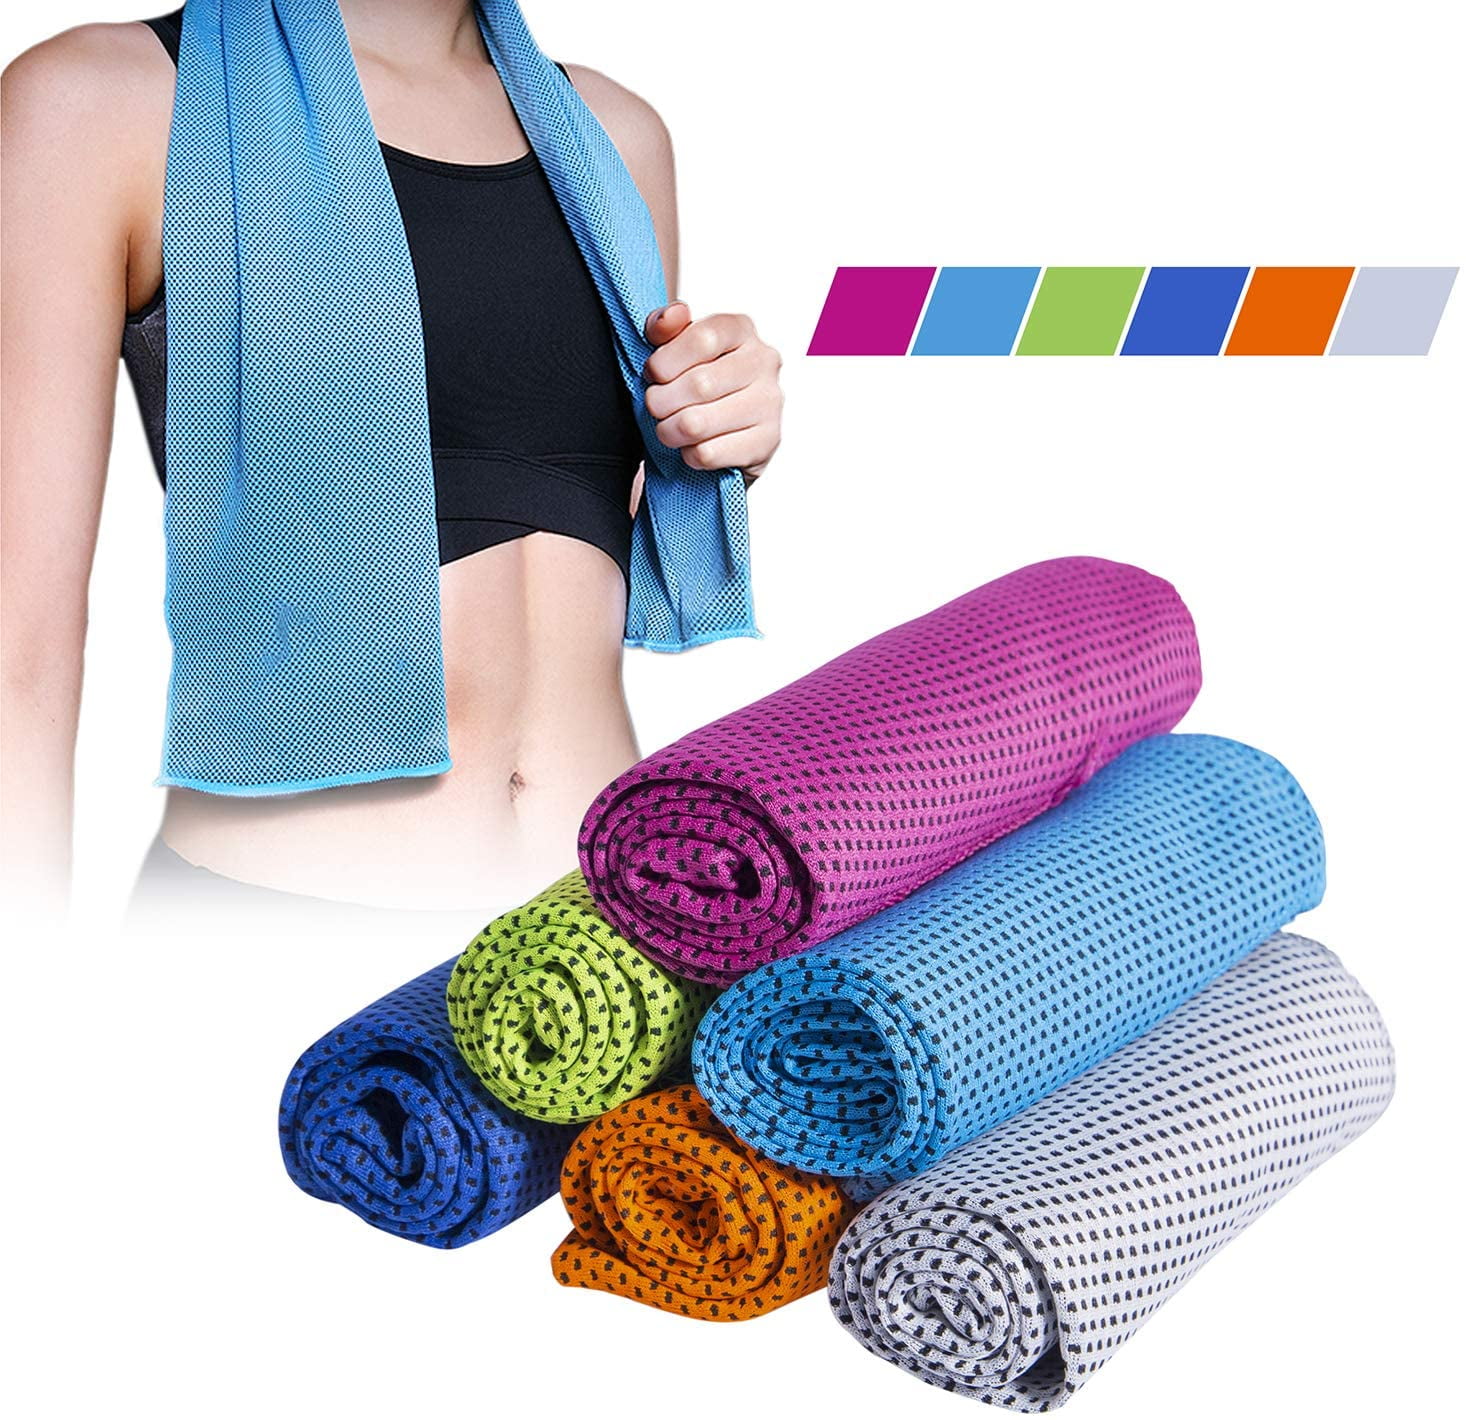 Swimming and Gargening Gym Way 2 Cool Microfiber Cooling Towel for Yoga